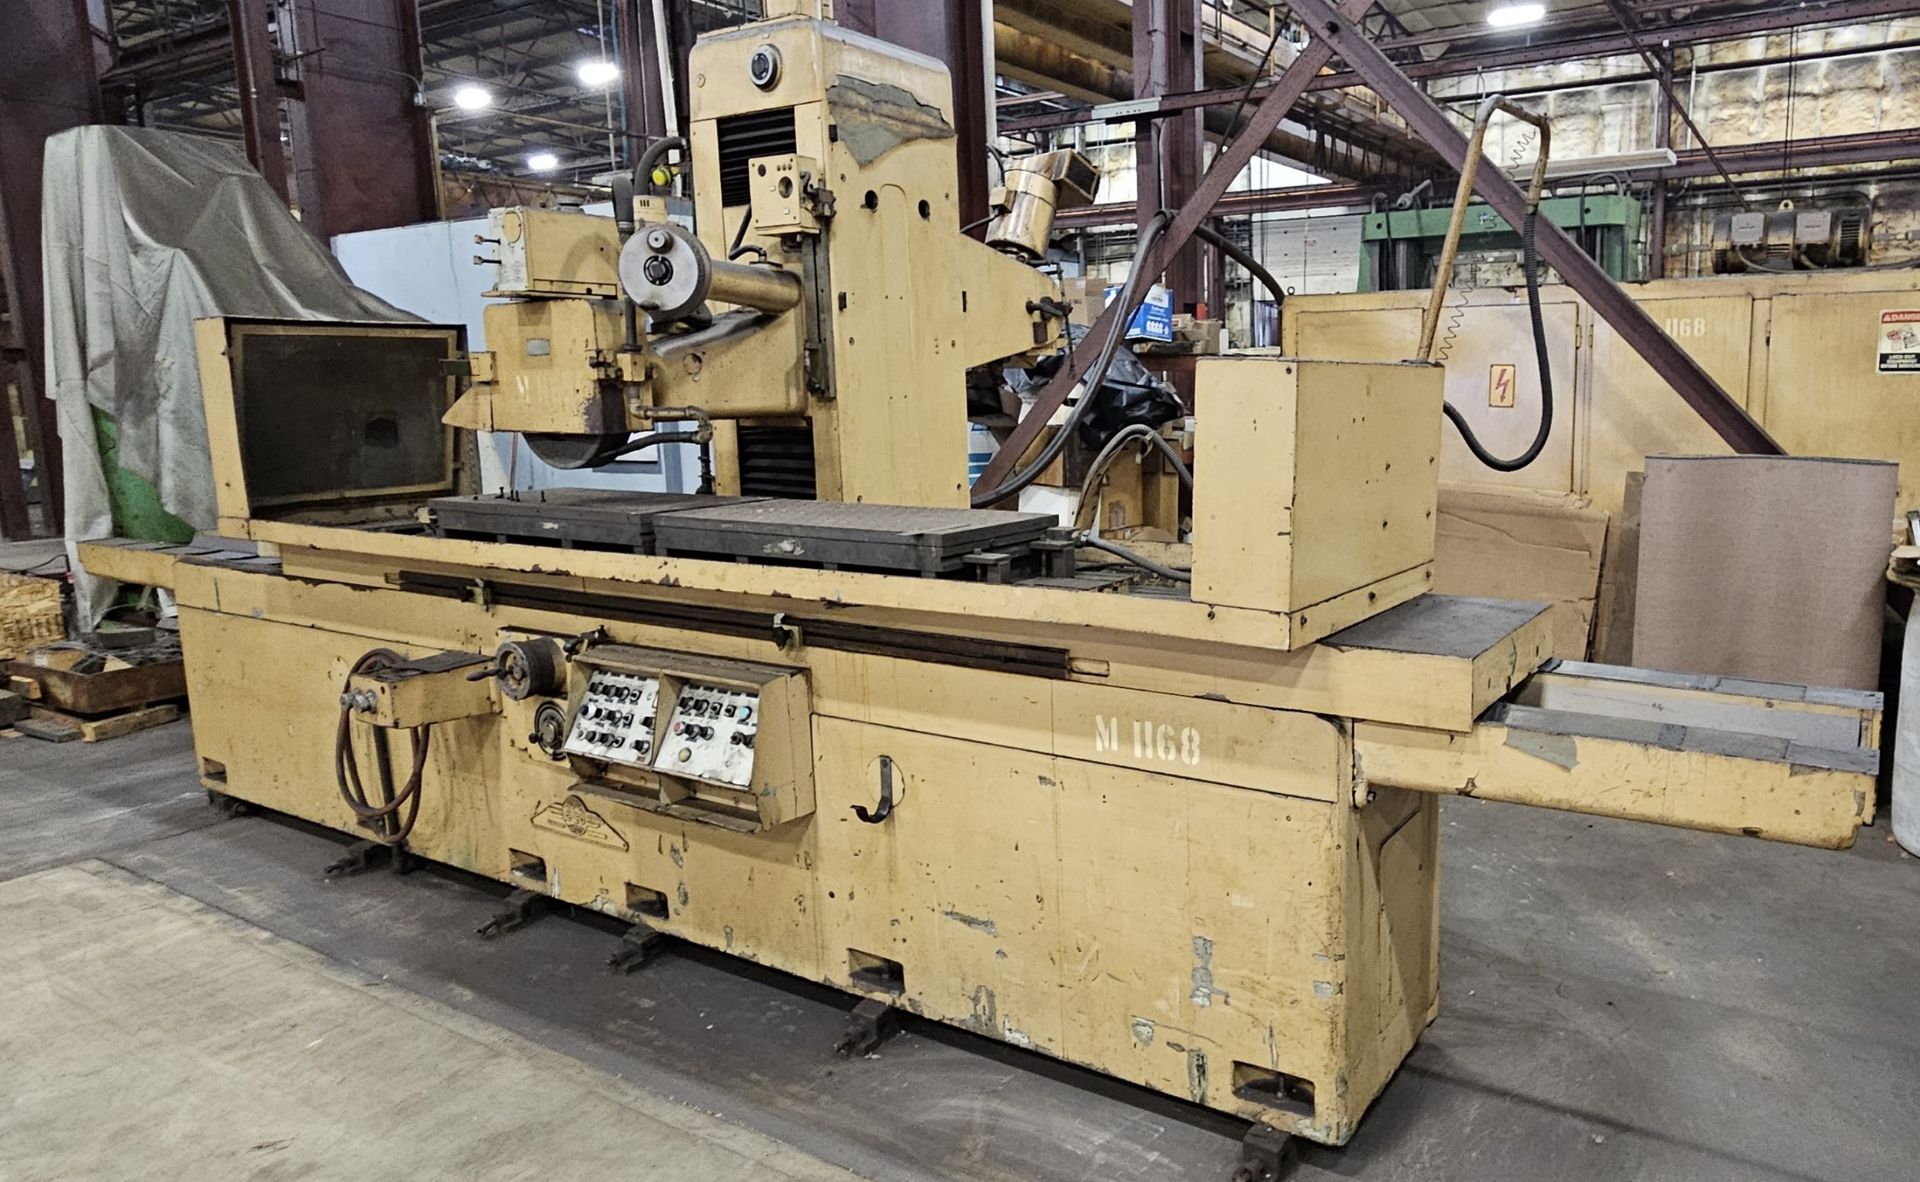 ELB SURFACE GRINDER, 20" x 100", DUAL SPINDLE / SURFACE & DOVETAIL GRINDER, 18" X 80" CHUCK, (